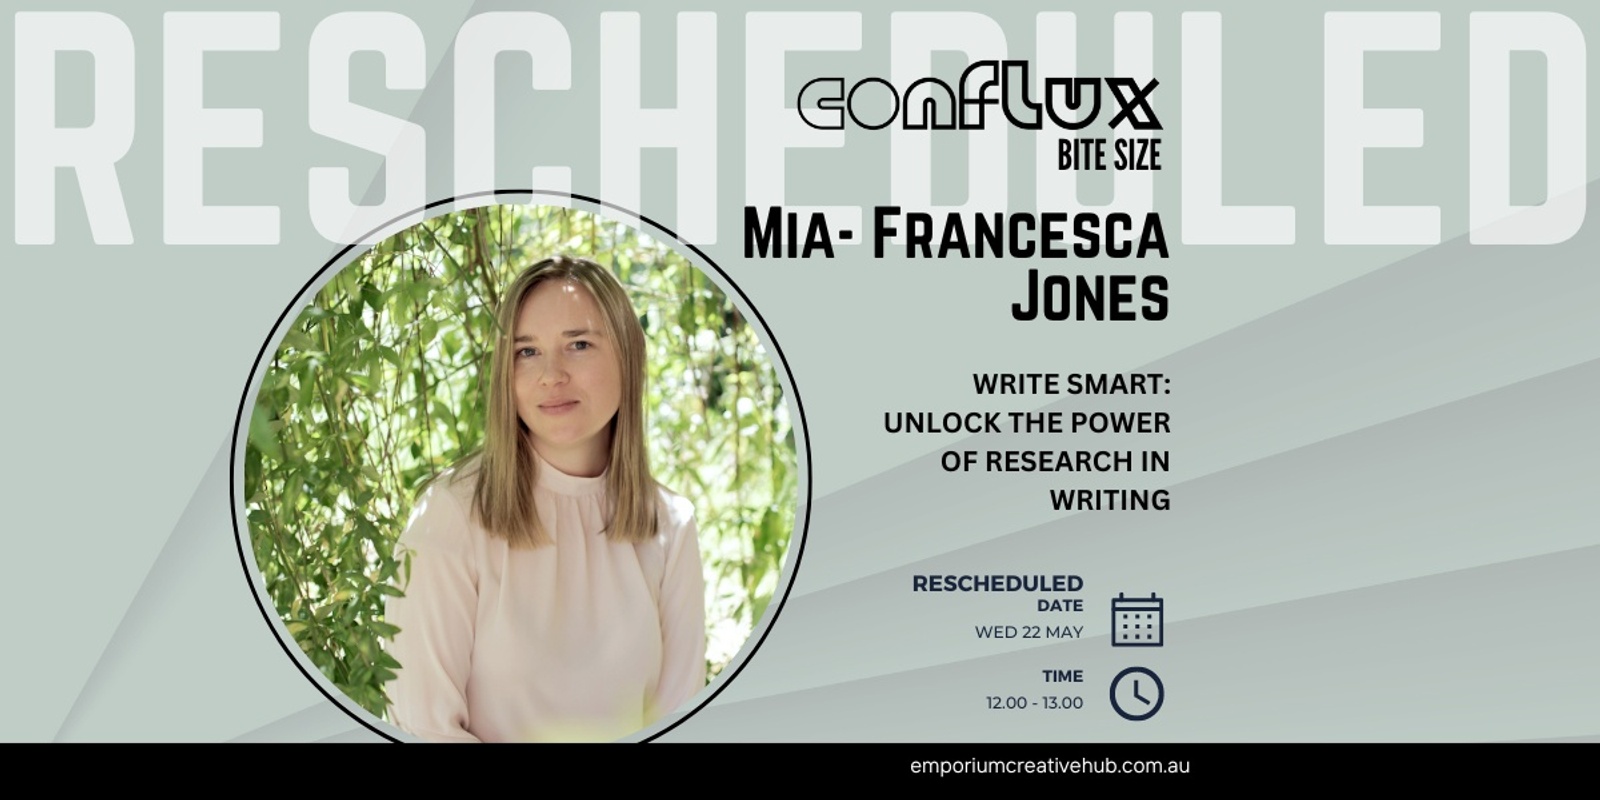 Banner image for RESCHEDULED Conflux Bite Size: Write smart: unlock the power of research in writing